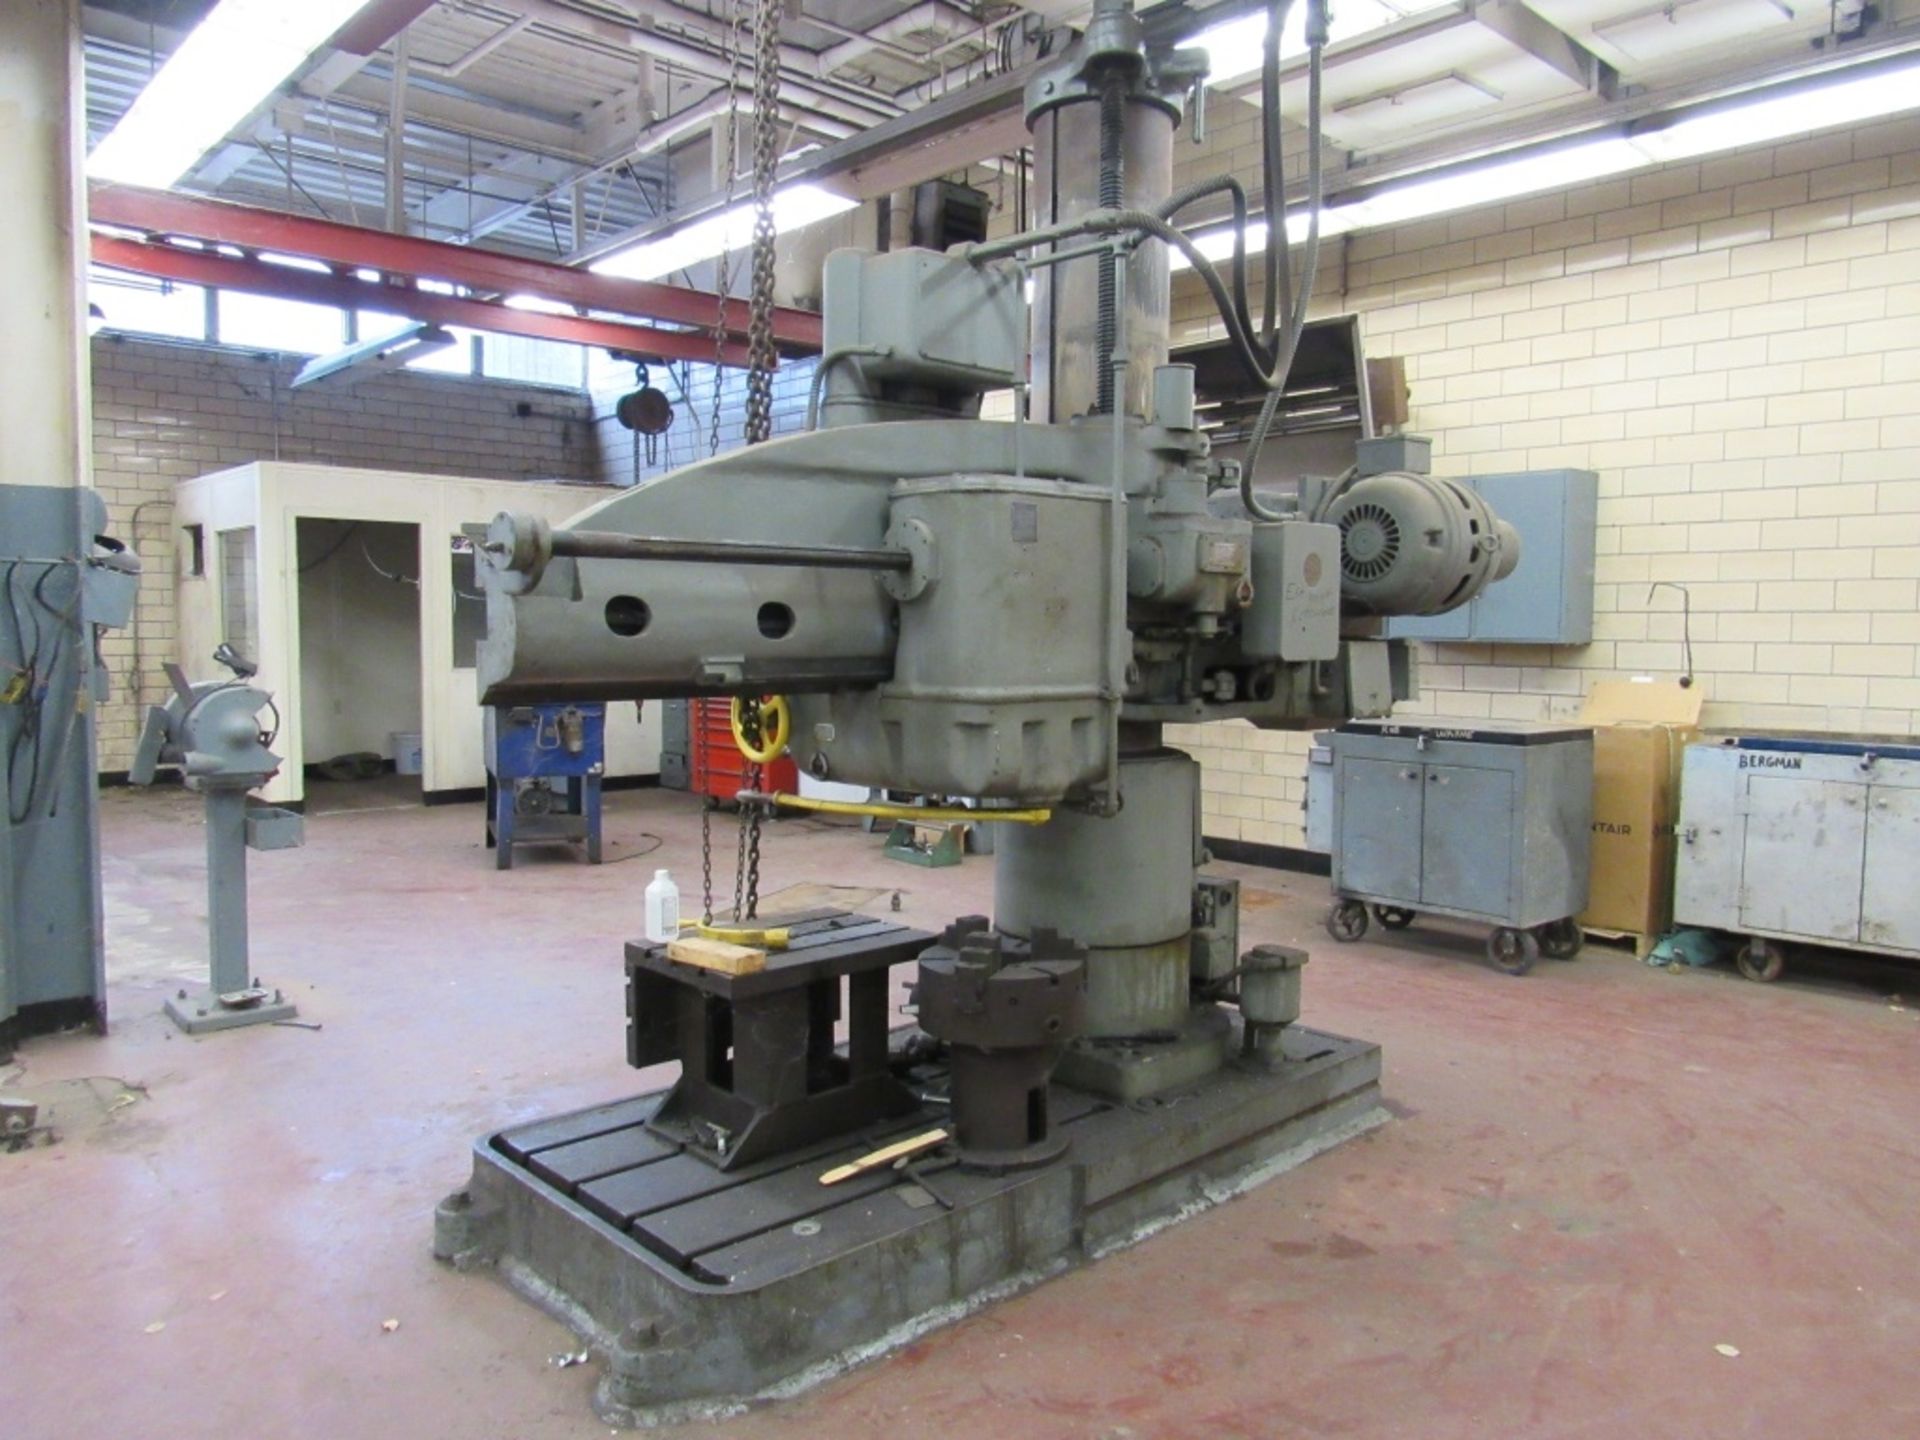 Carlton Radial Arm Drill- Model - Unmarked Serial - Unmarked Rigging Fee - $750.00 4' Arm 15" Col - Image 3 of 25